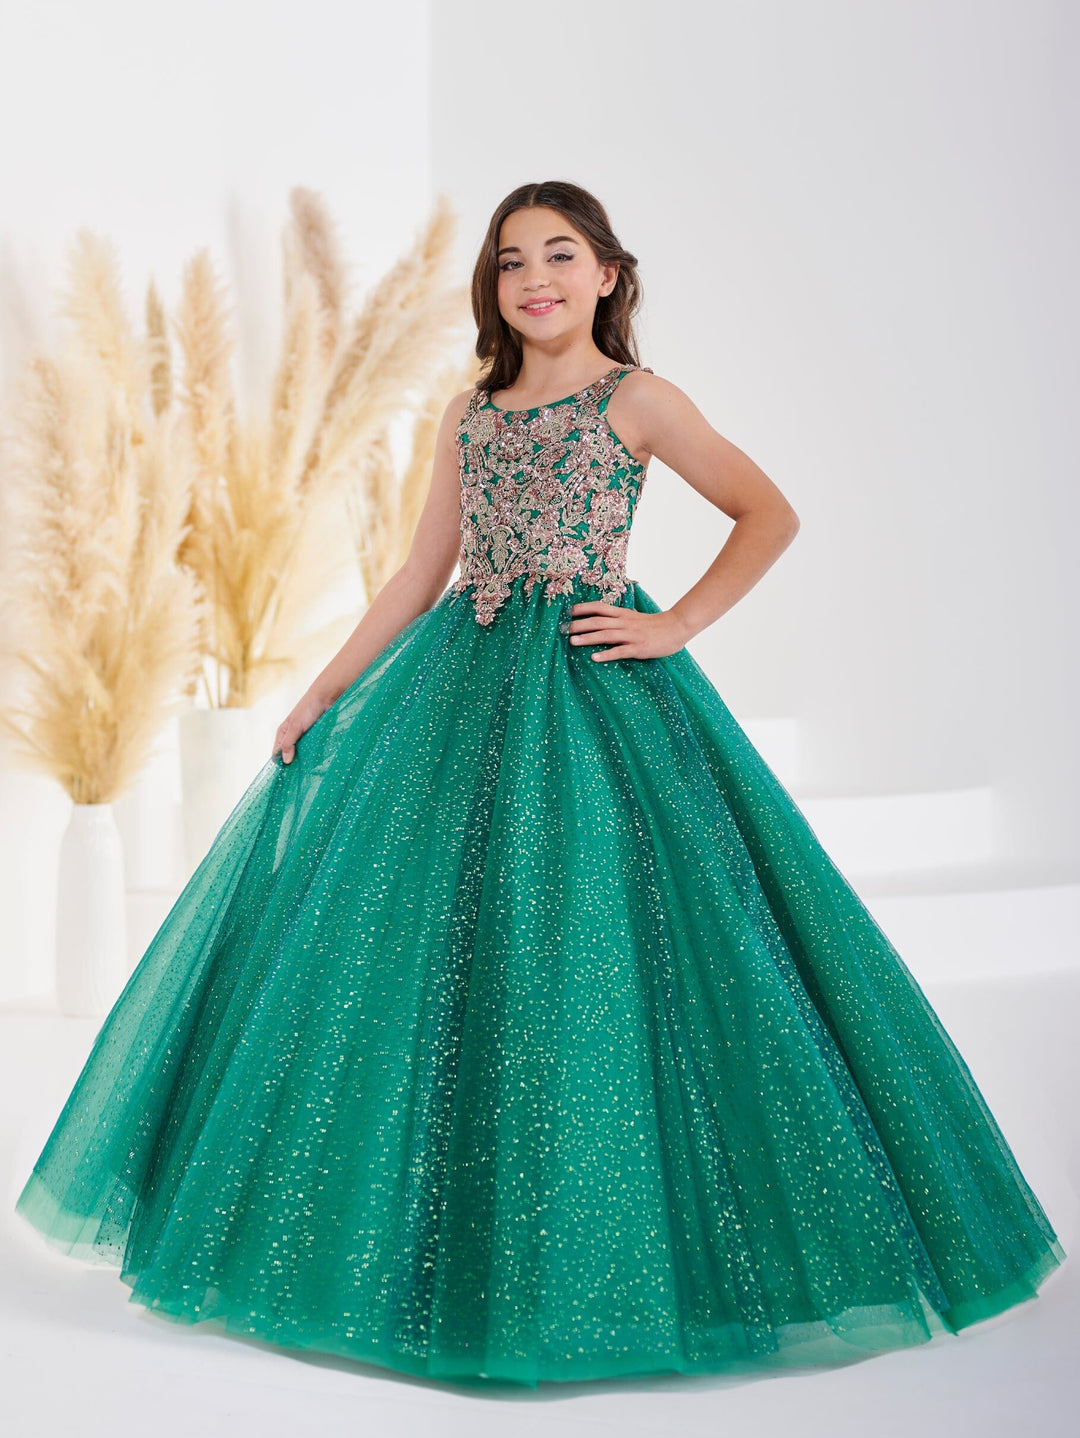 Girls Applique Sleeveless Gown by Tiffany Princess 13690